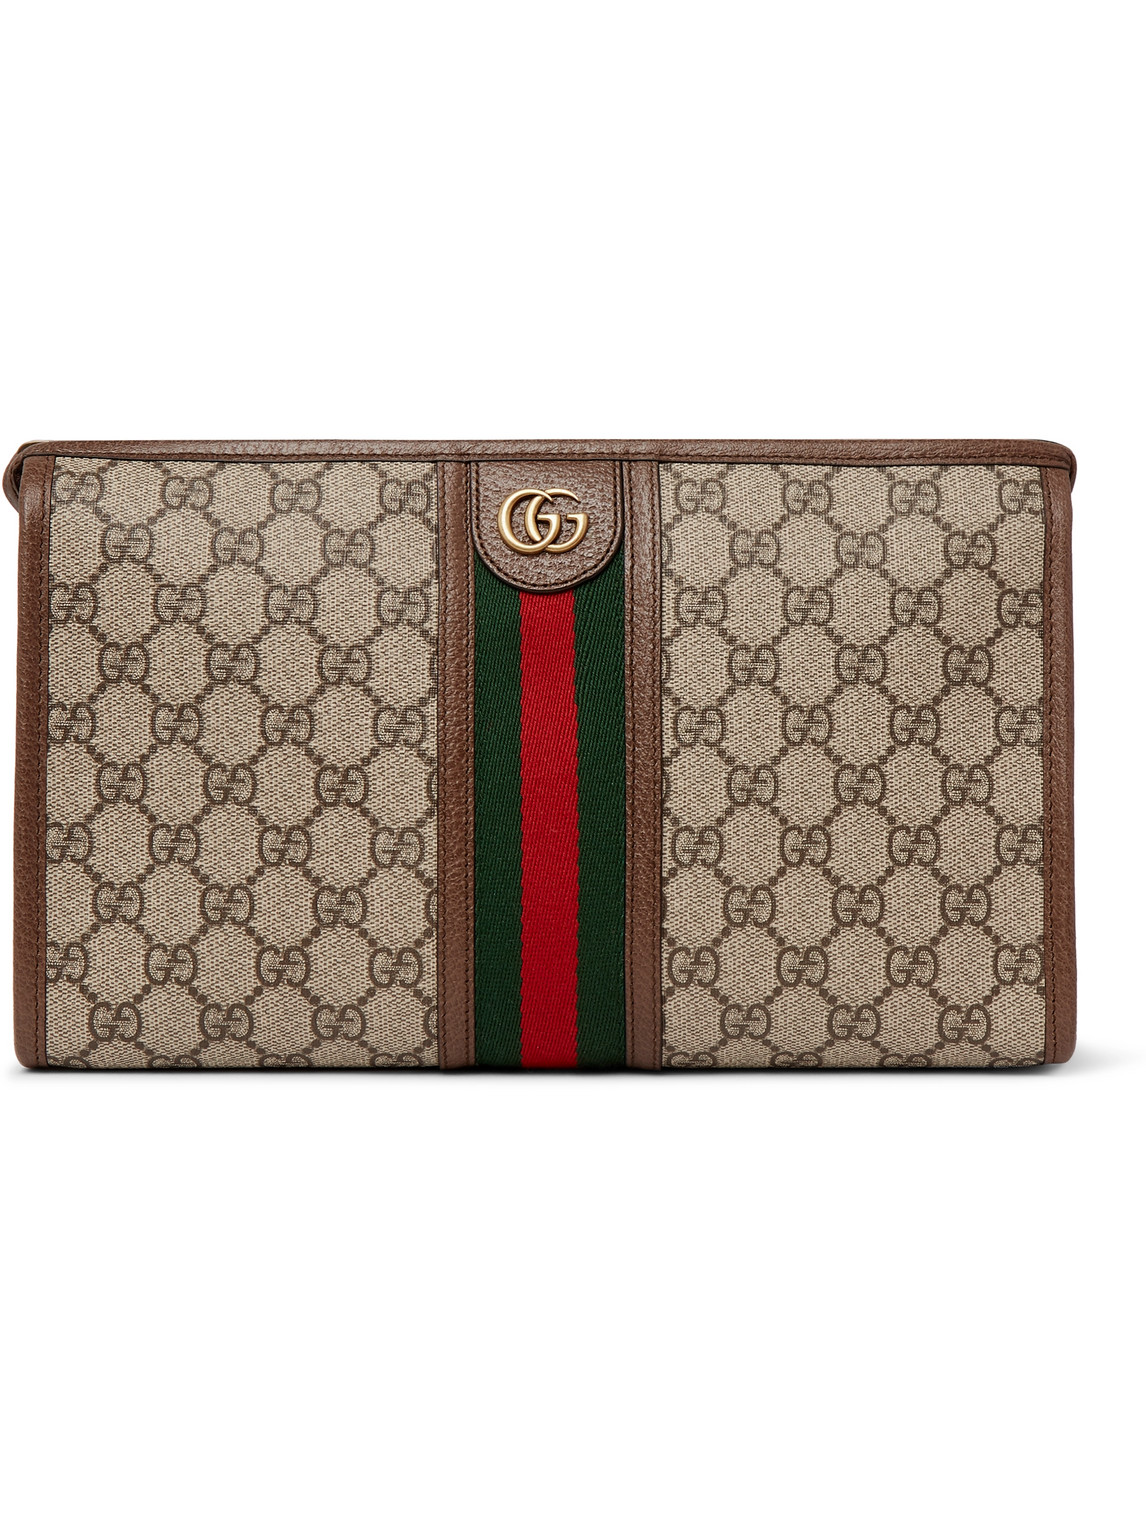 Gucci - Ophidia Leather And Webbing-Trimmed Logo-Jacquard Coated-Canvas Wash  Bag - Men - Brown for Men